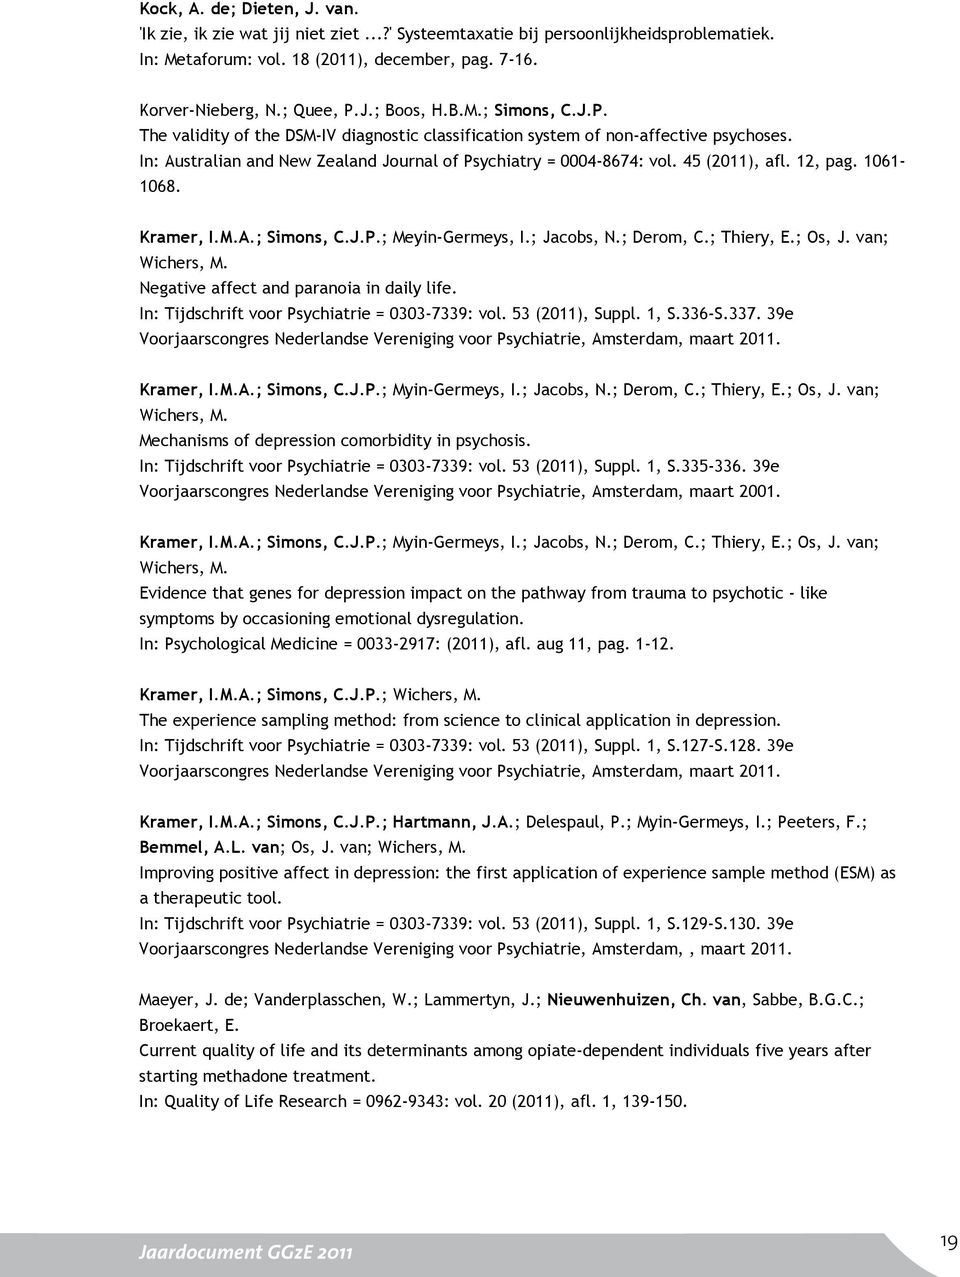 12, pag. 1061-1068. Kramer, I.M.A.; Simons, C.J.P.; Meyin-Germeys, I.; Jacobs, N.; Derom, C.; Thiery, E.; Os, J. van; Wichers, M. Negative affect and paranoia in daily life.